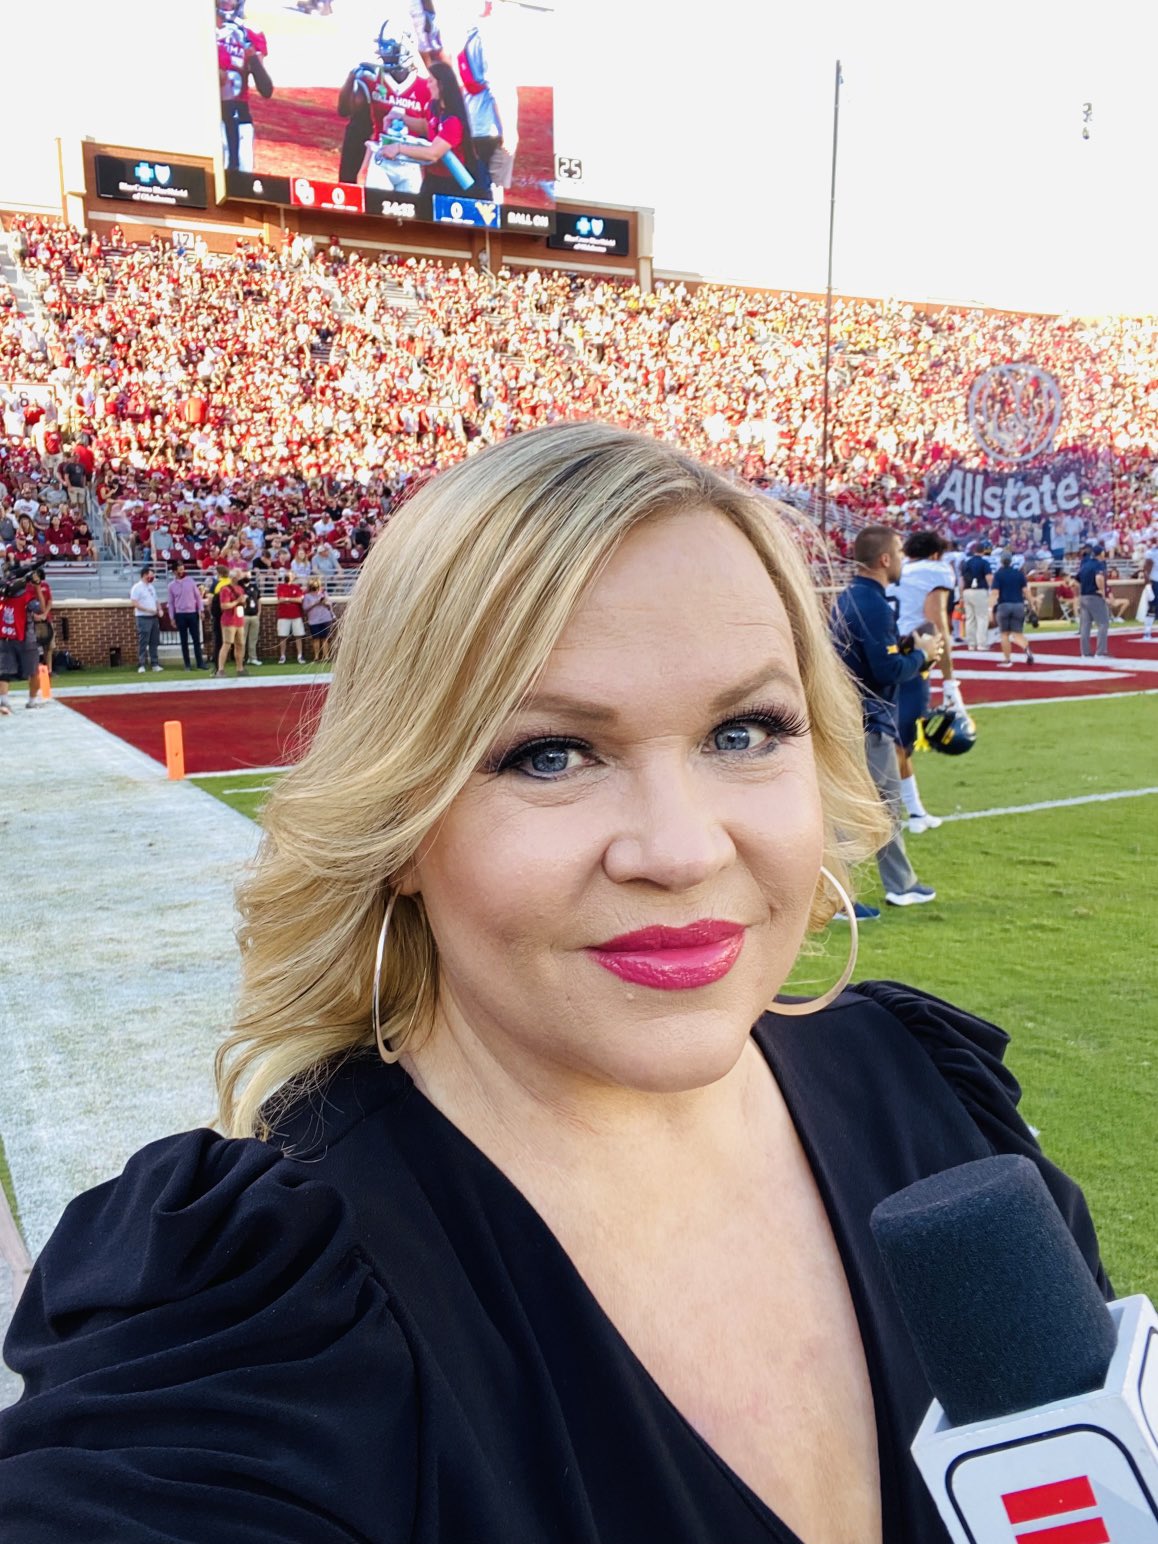 Holly Rowe on X: Just gonna leave this here. Best champ outfit ever. ⁦@ dawnstaley⁩ another hit ⁦@LouisVuitton⁩  / X